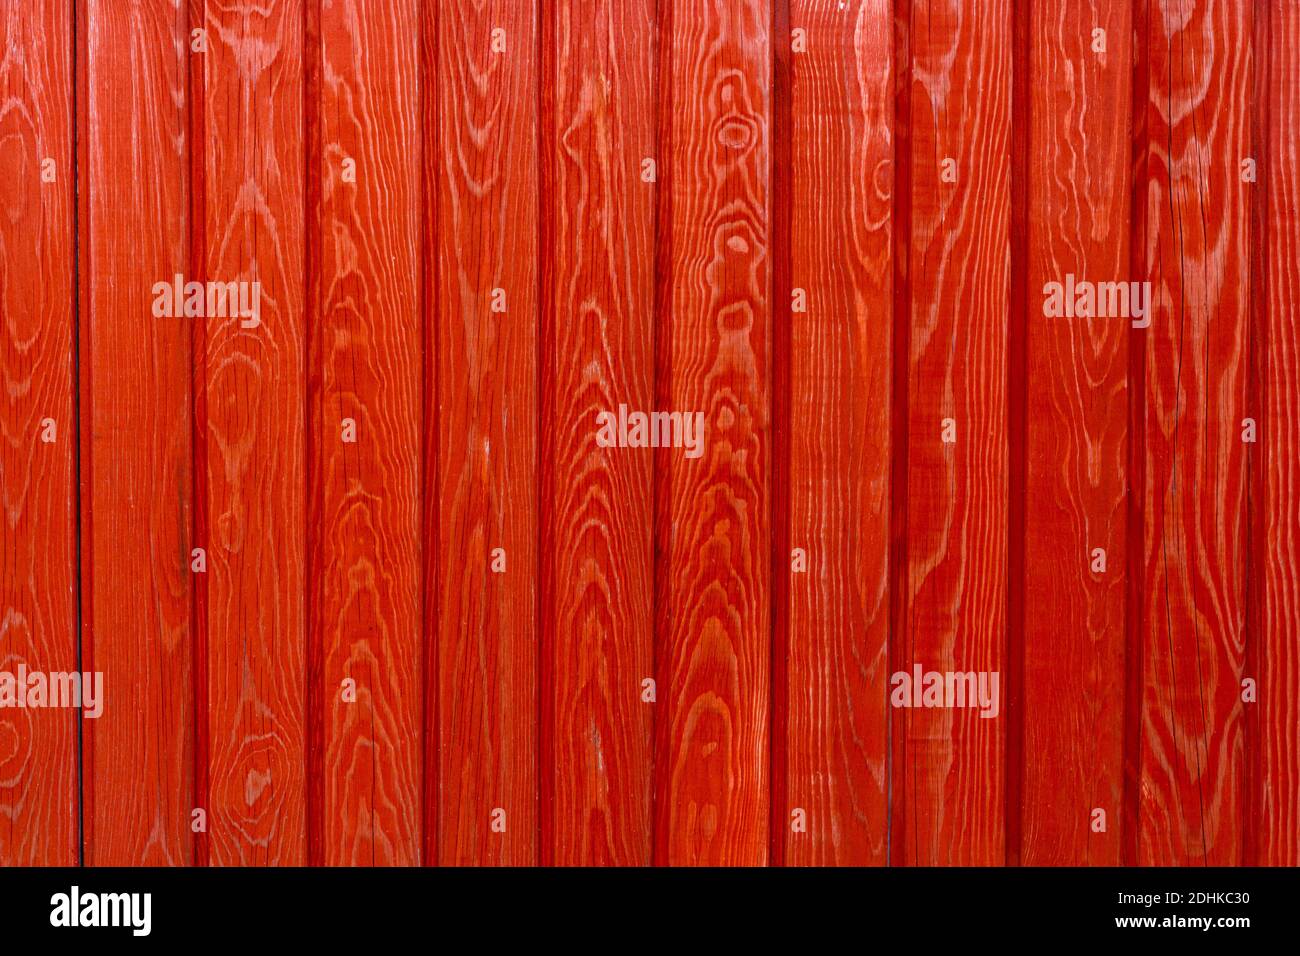 wall made of wooden boards natural wood pine painted in bright red Stock Photo